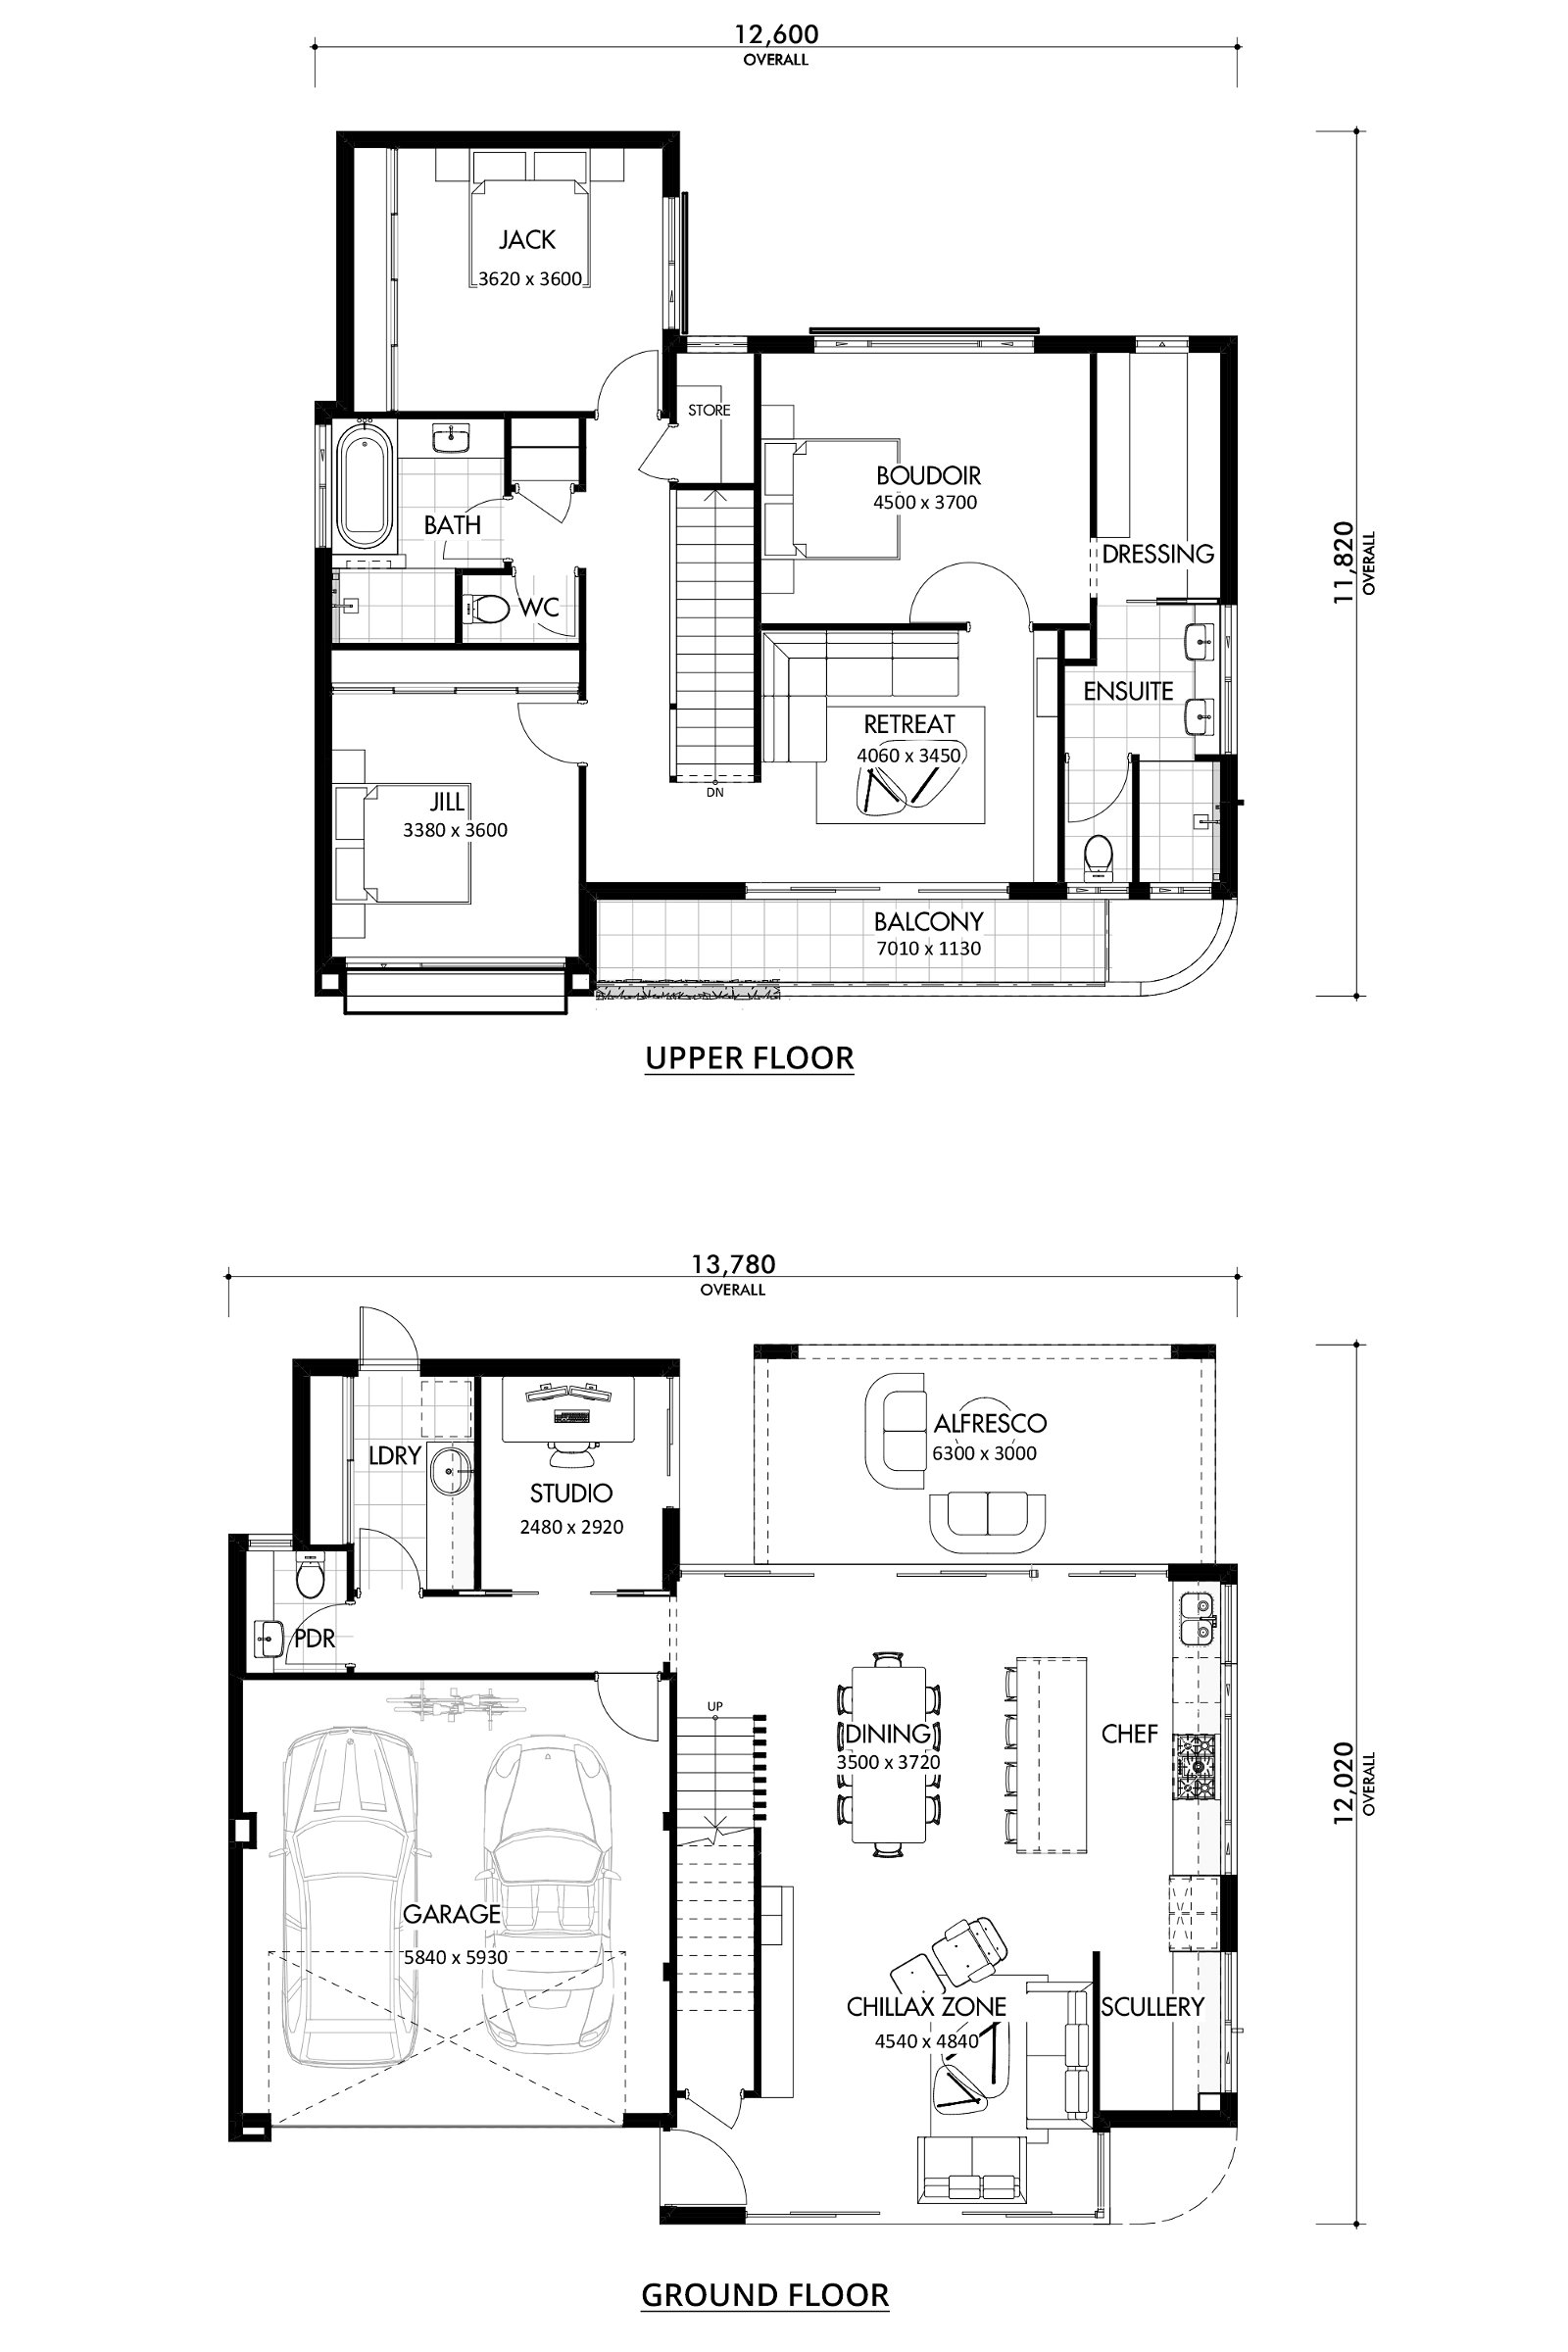 Residential Attitudes - Cabbage Patch Kid - Floorplan - Cabbage Patch Kid Floorplan Website